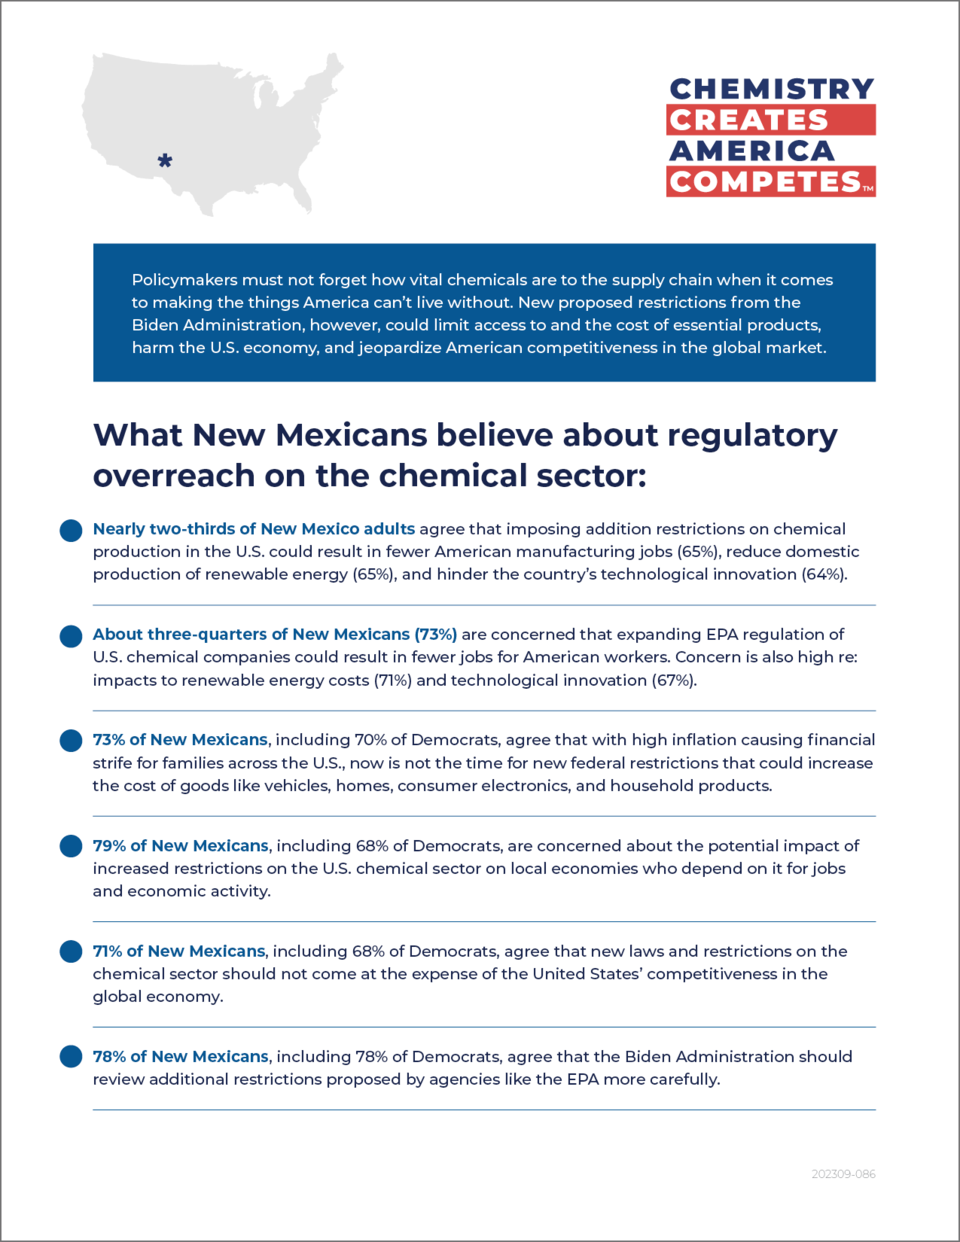 What New Mexicans Believe About Regulatory Overreach on Chemical Sector - Fact Sheet